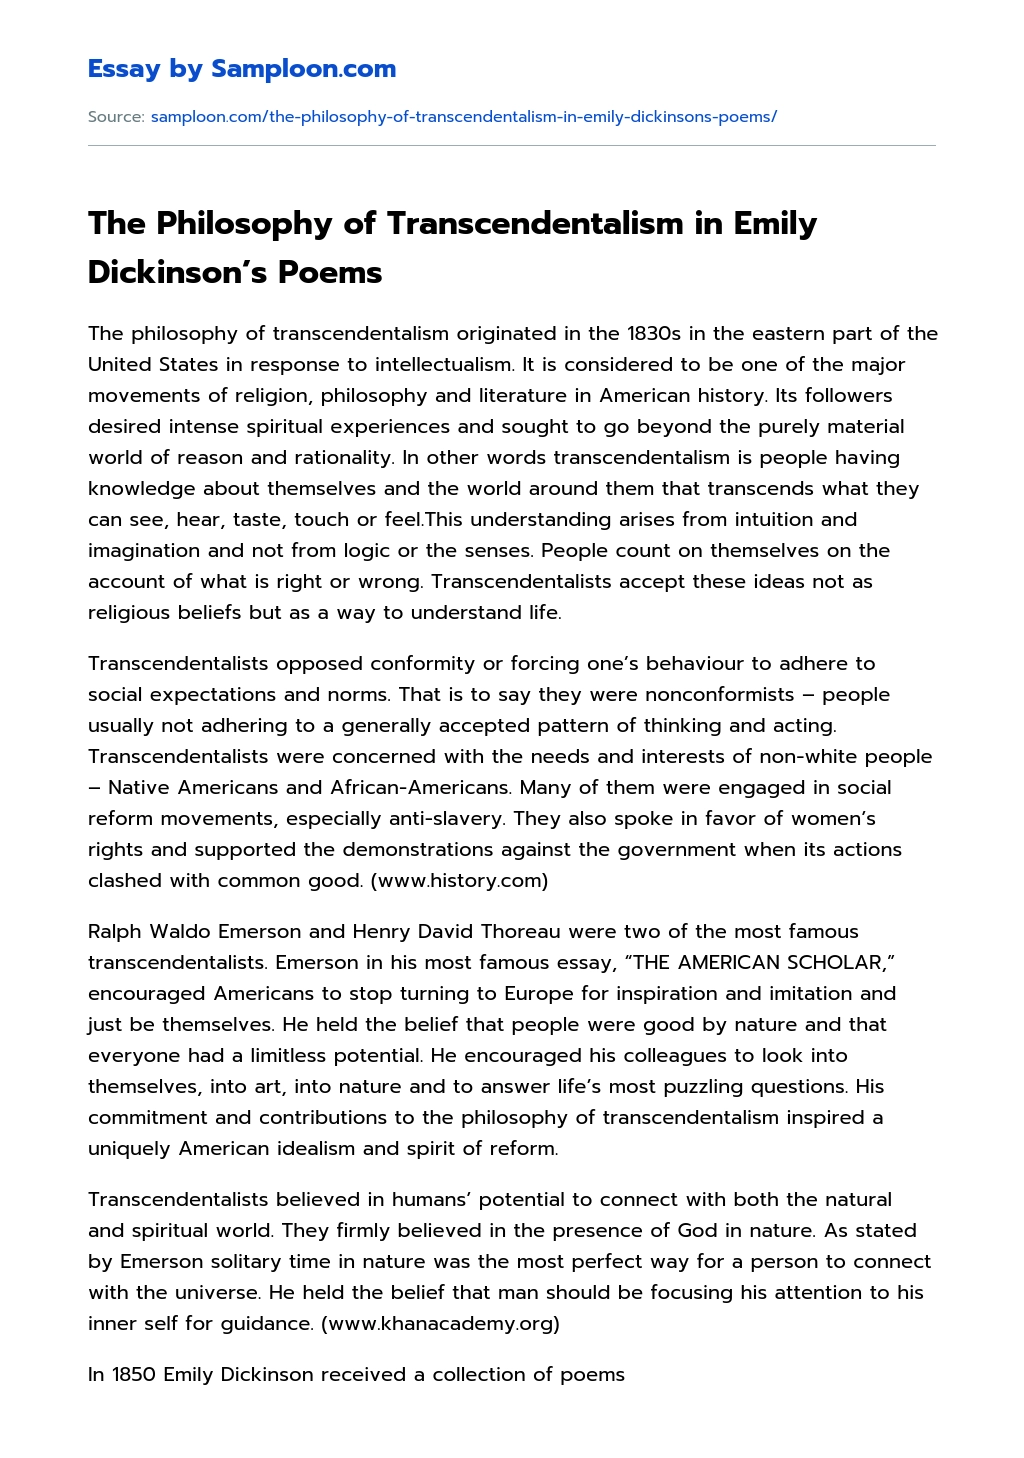 The Philosophy of Transcendentalism in Emily Dickinson’s Poems essay